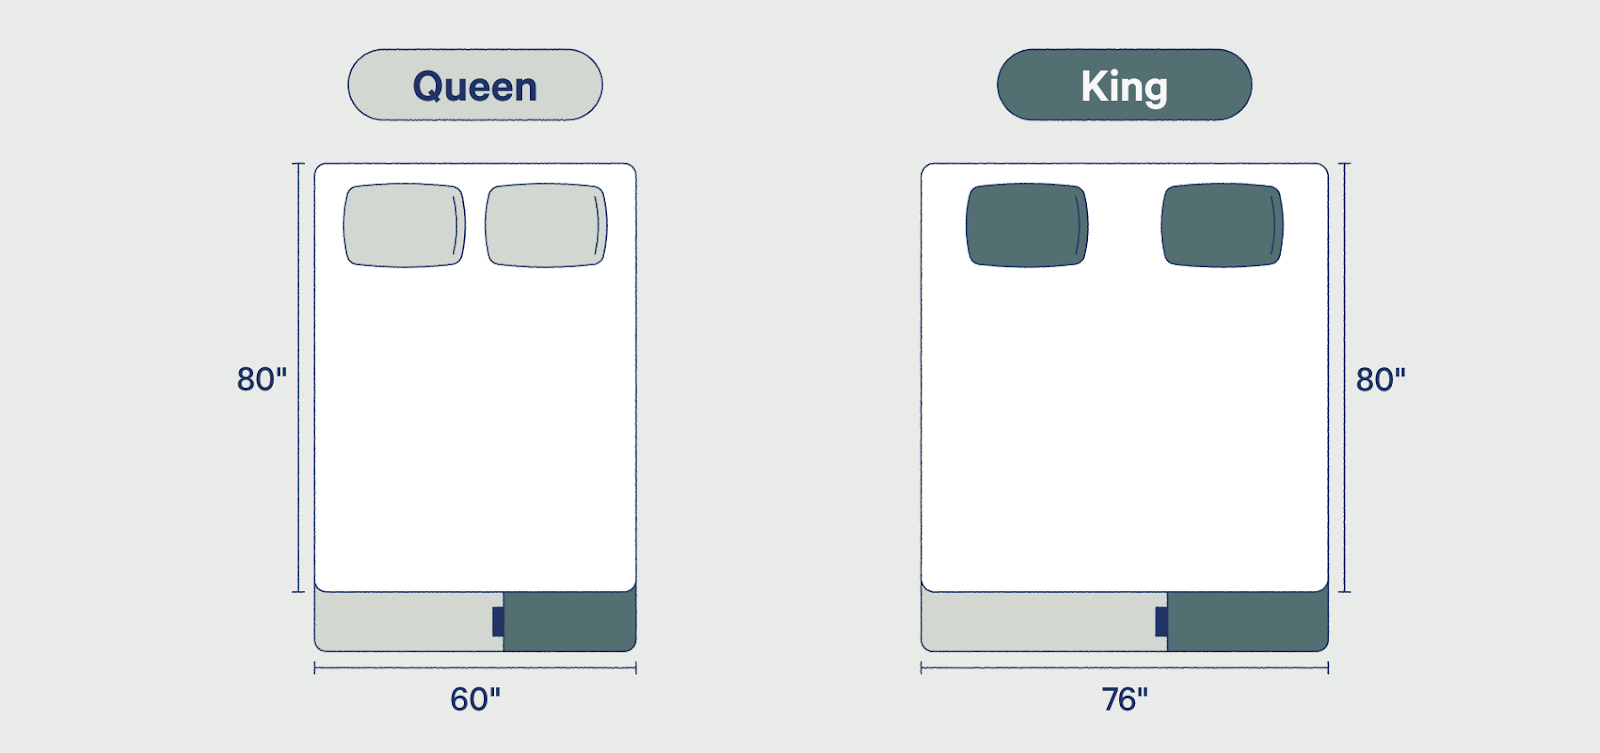 King Vs Queen Bed Size And Comparison, Are There Beds Bigger Than King